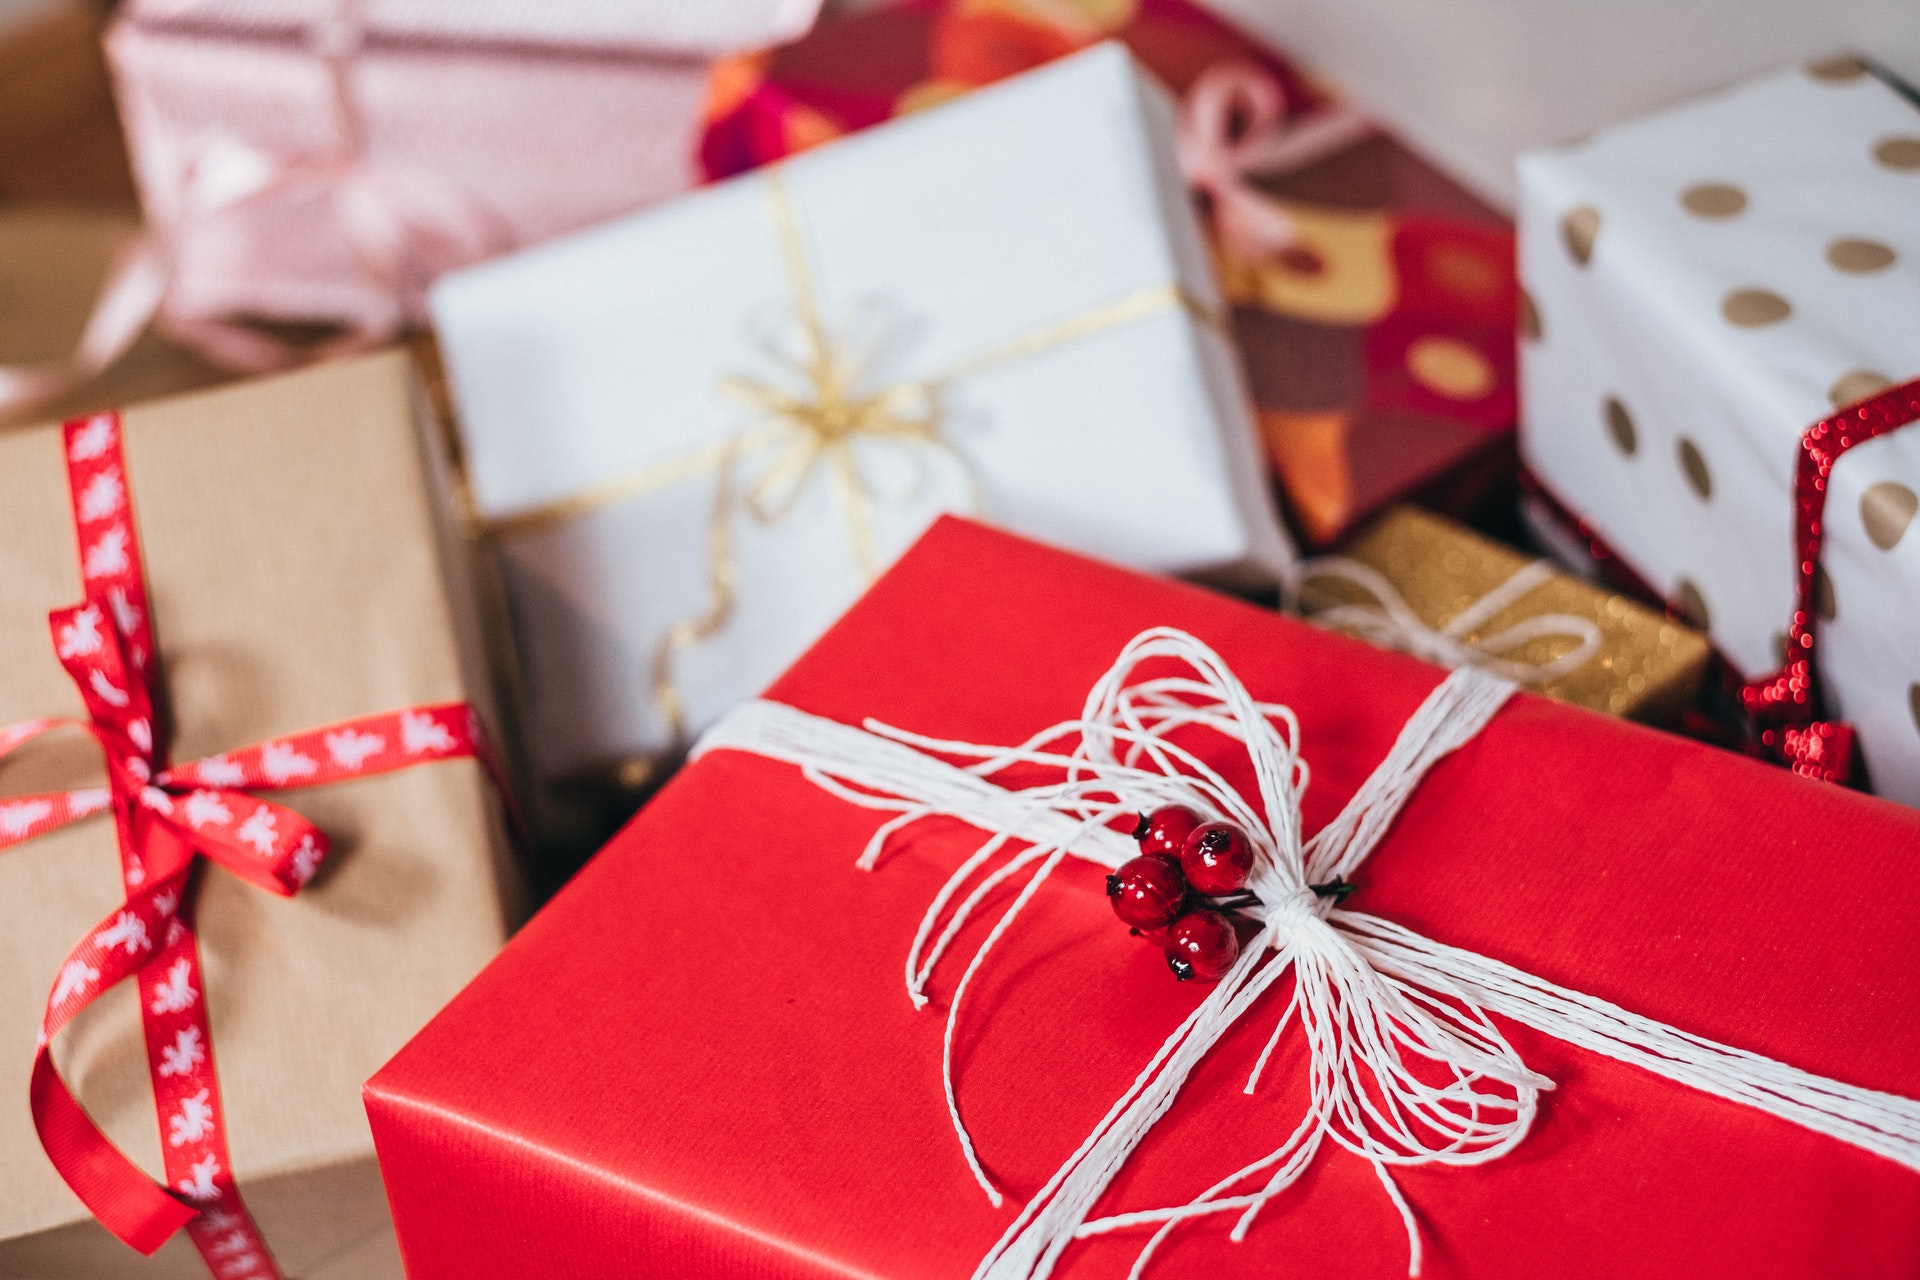 45% Of Americans Would Pay To Neutralize Holiday Delivery Emissions | Cloverly